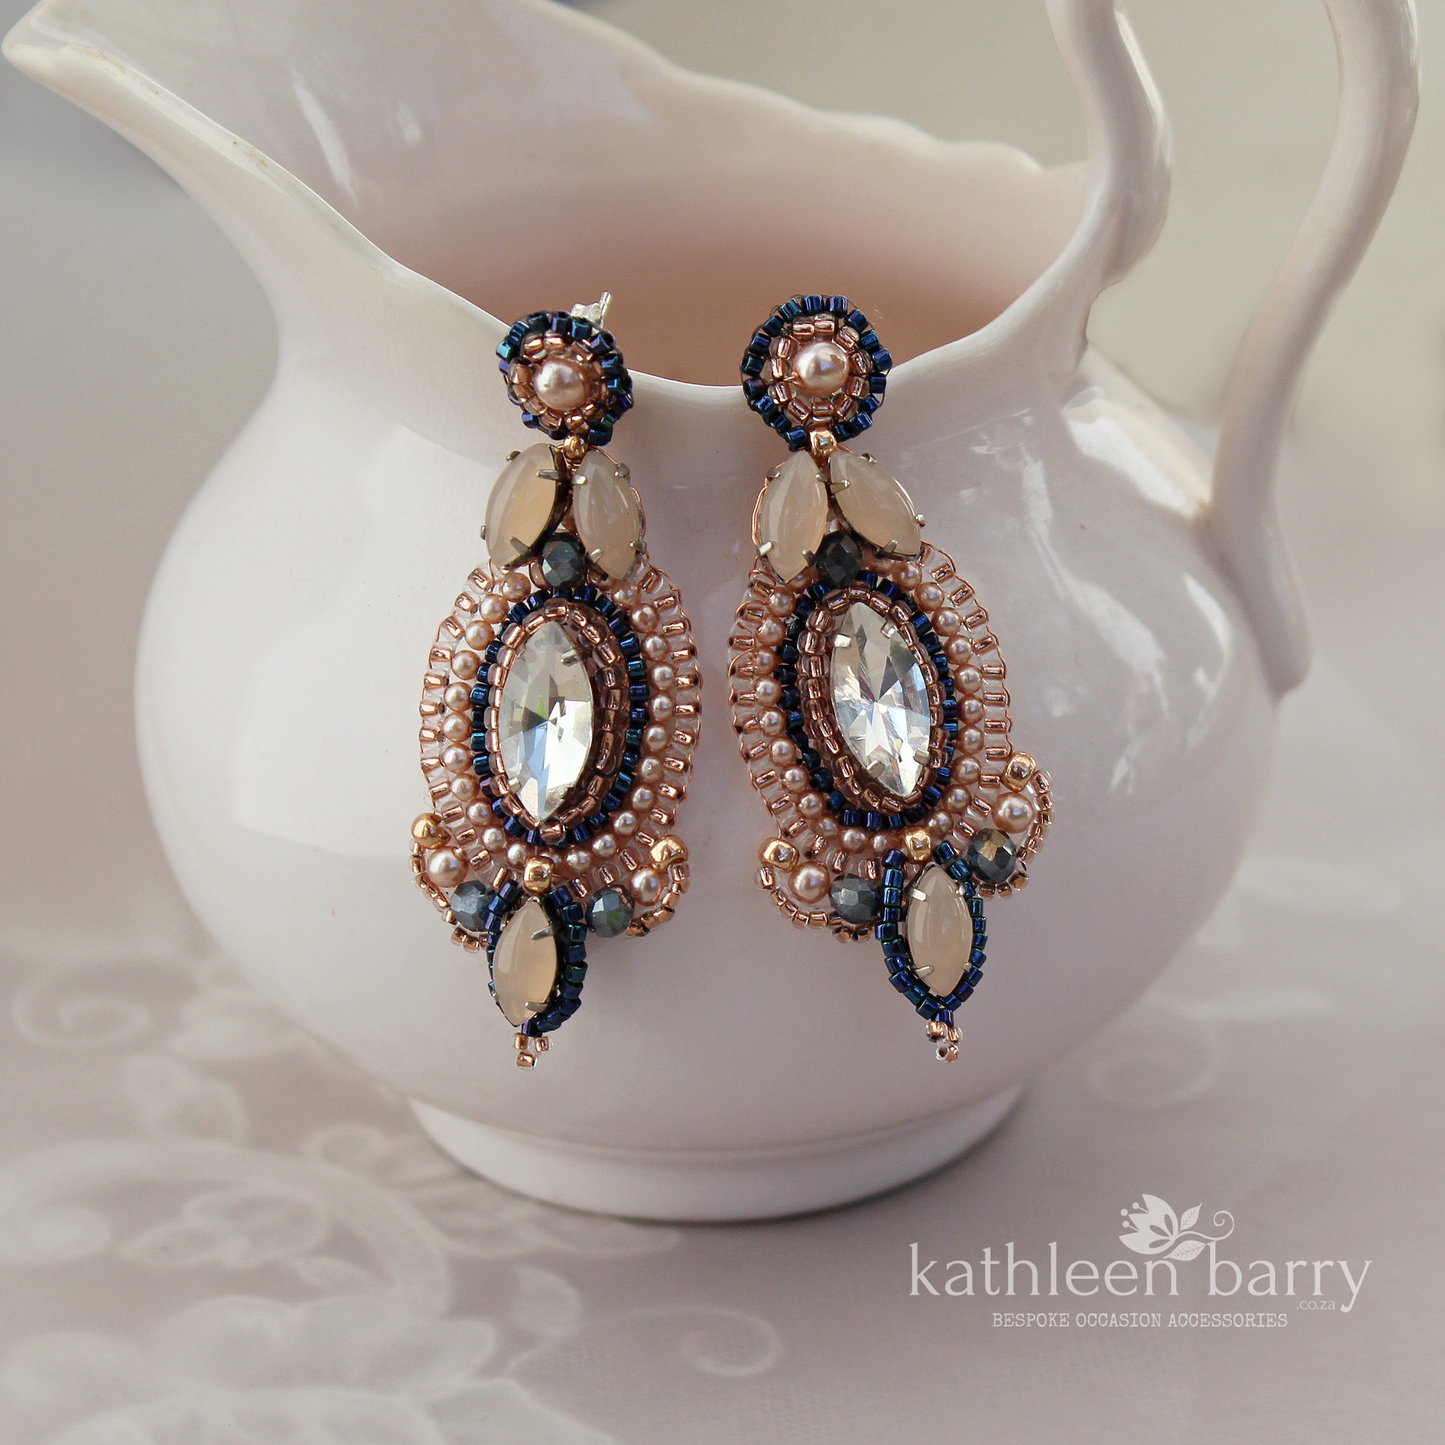 Shelby earrings - Rhinestone silver and beaded embroidery - color options available